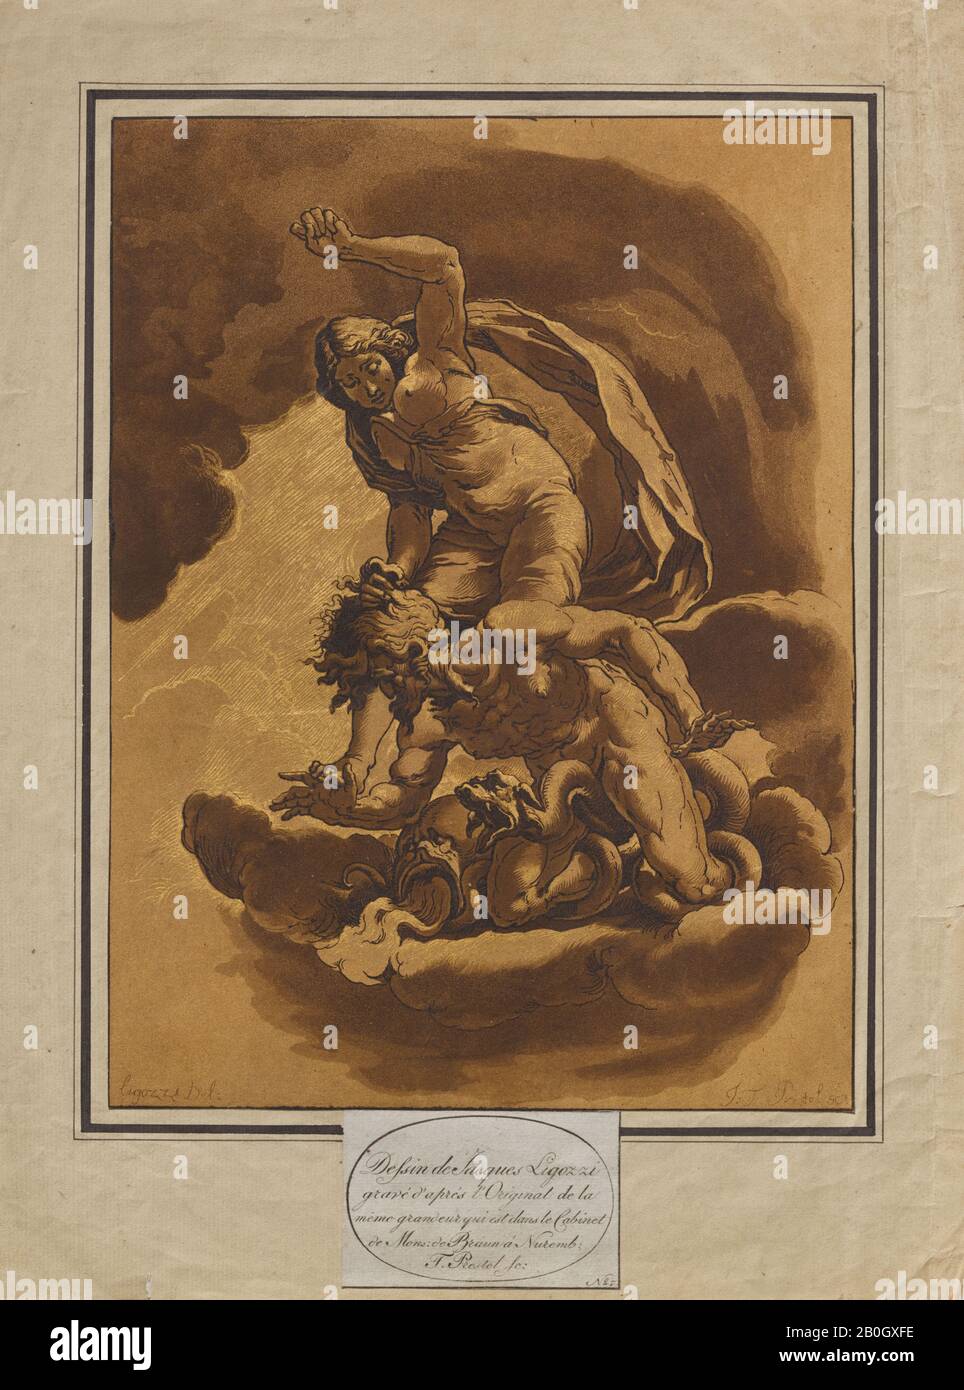 Johann Gottlieb Prestel, German, 1739–1808, after Jacopo Ligozzi, (Italian, 1547–1627), Allegorical Composition: Virtue Overcoming Sin, 1780, Color etching and aquatint, with gold woodcut additions, on paper, image: 12 1/16 x 8 in. (30.6 x 20.3 cm Stock Photo